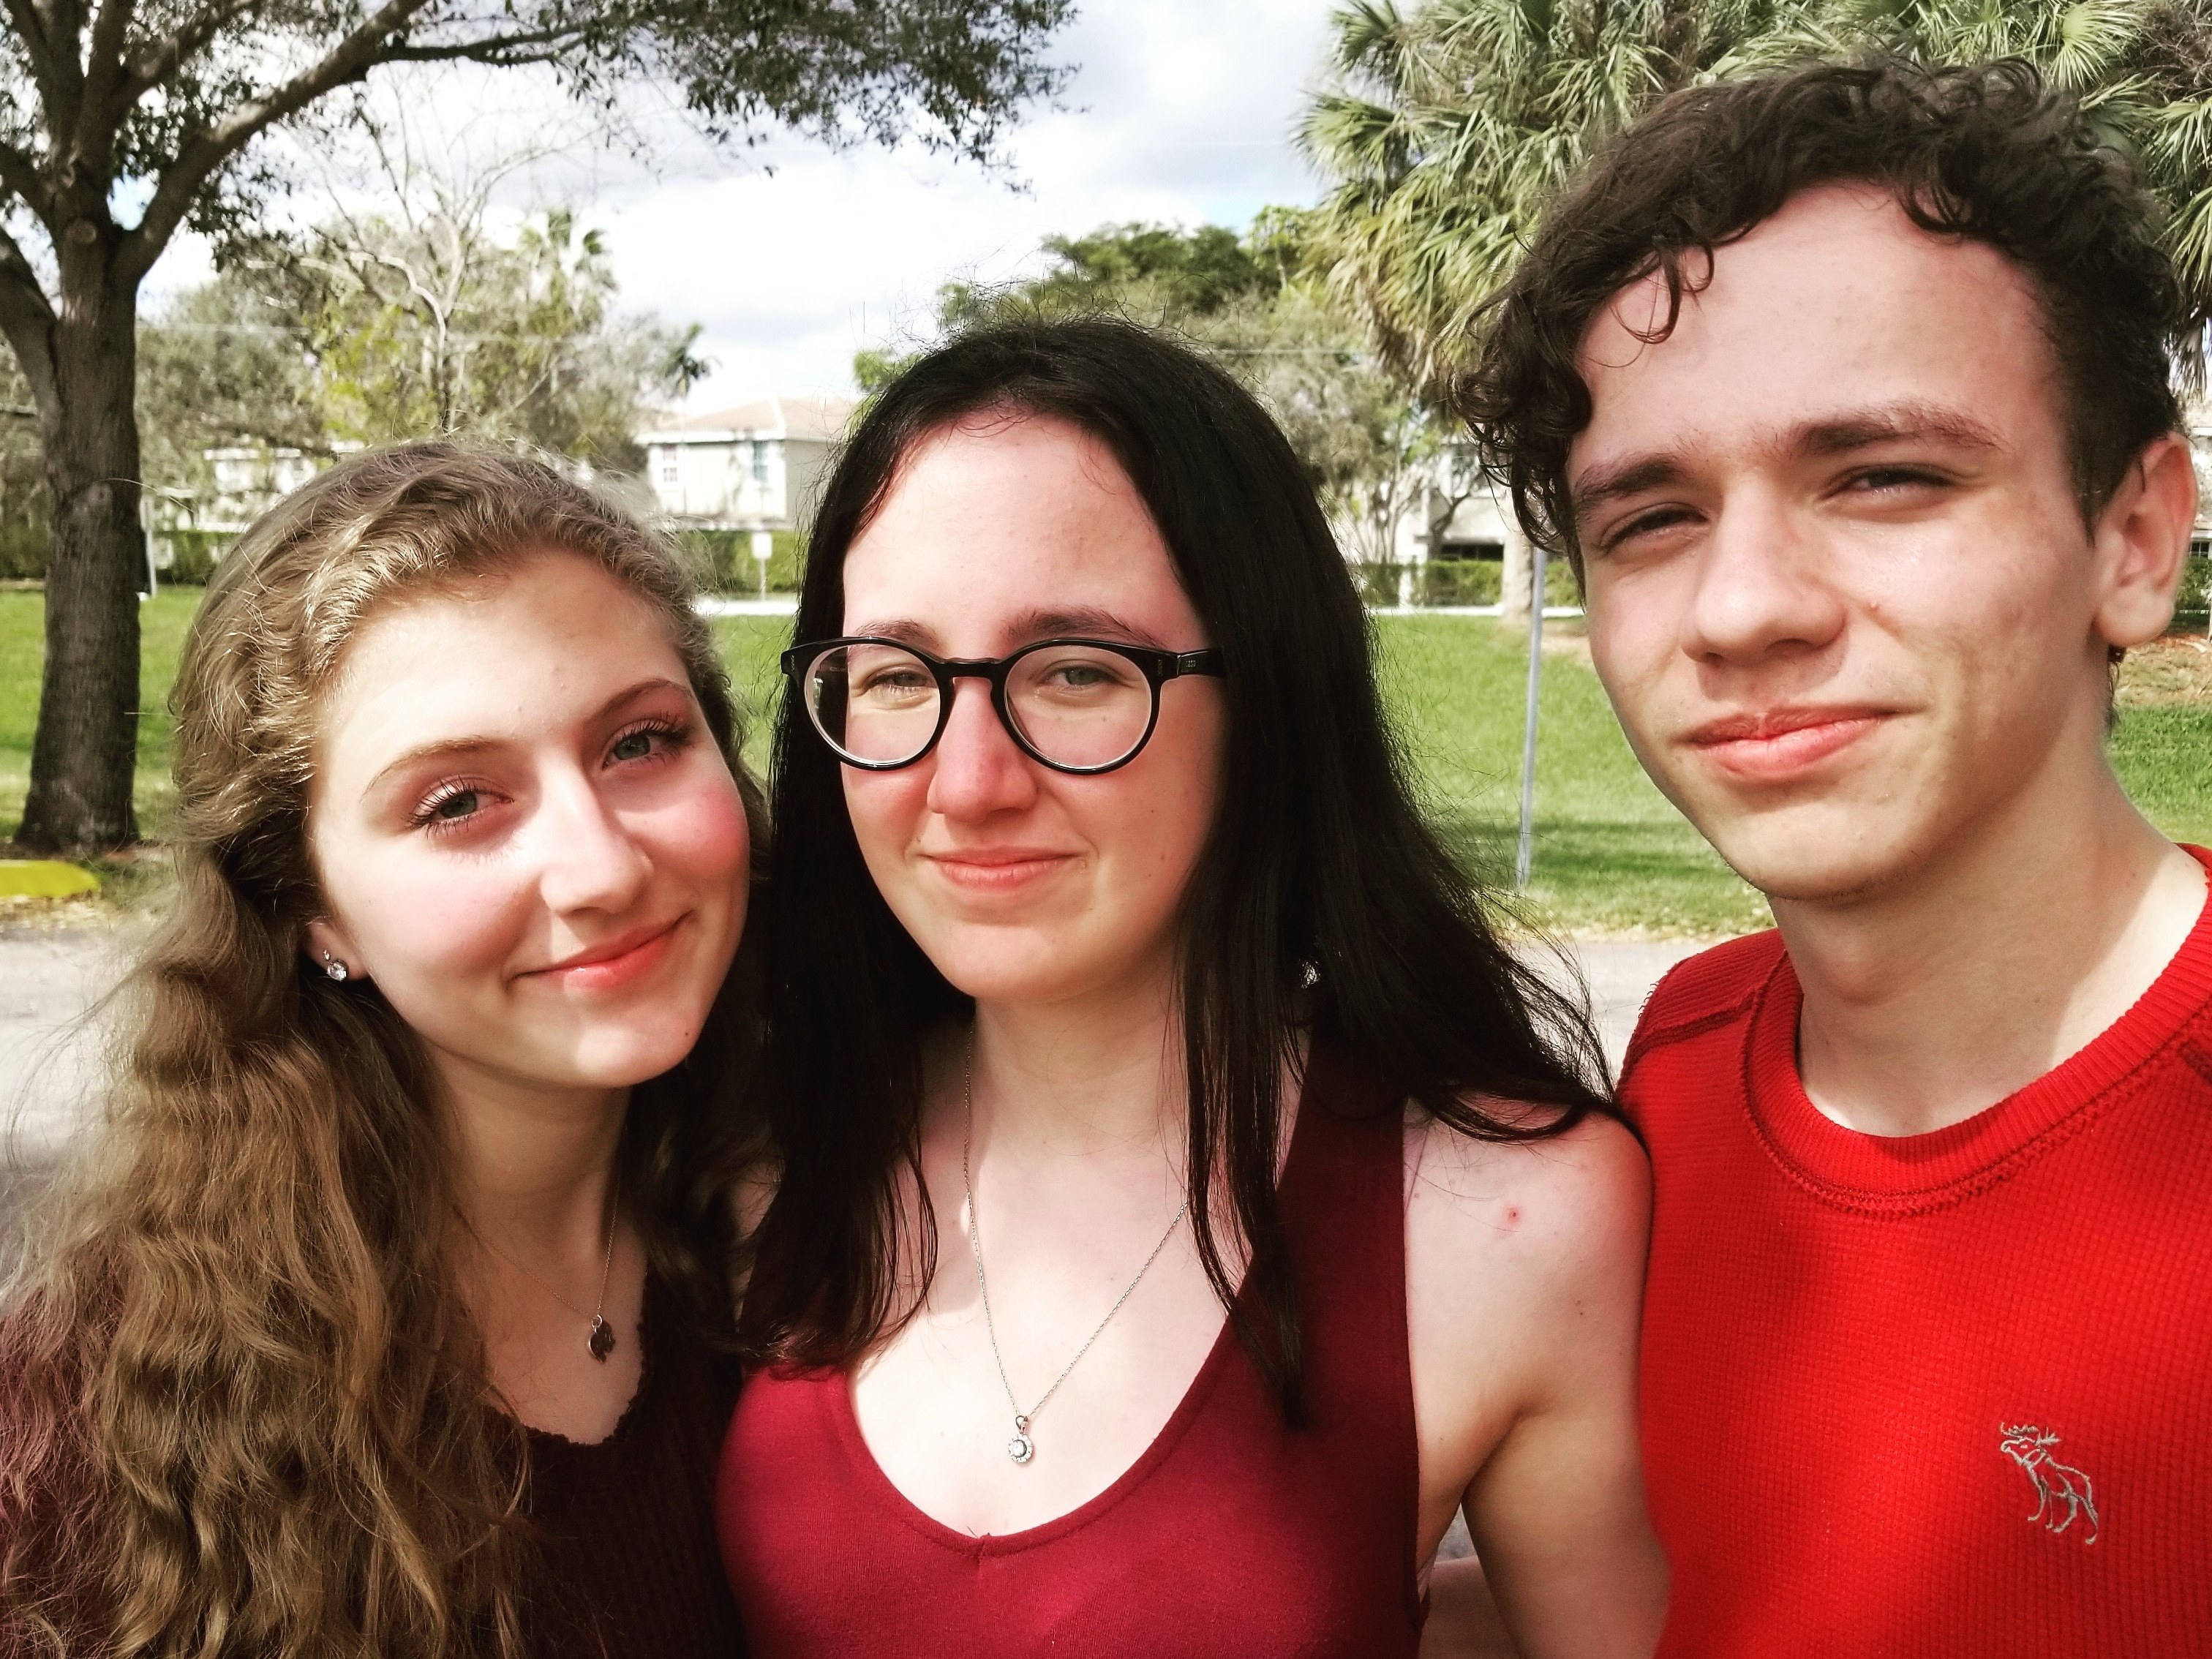 Dylan Redshaw, age 17, Sophie Whitney, age 18, and Chris Grady, age 18, are all seniors at Marjory Stoneman Douglas High School who survived last Wednesday's deadly shooting. Now they want to change America's gun laws.
